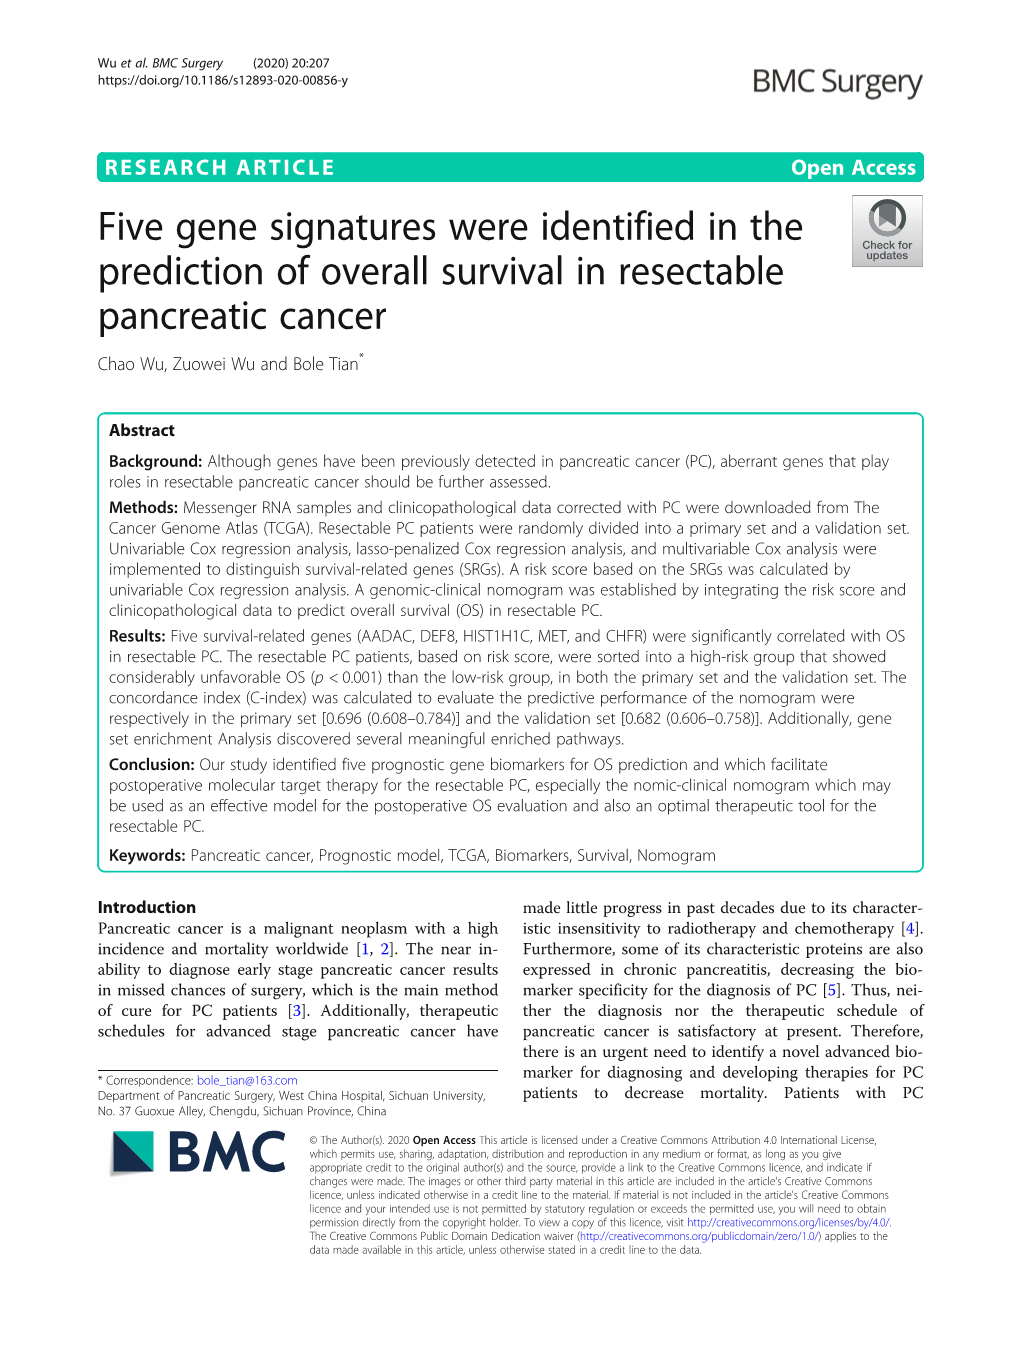 Five Gene Signatures Were Identified in the Prediction of Overall Survival in Resectable Pancreatic Cancer Chao Wu, Zuowei Wu and Bole Tian*